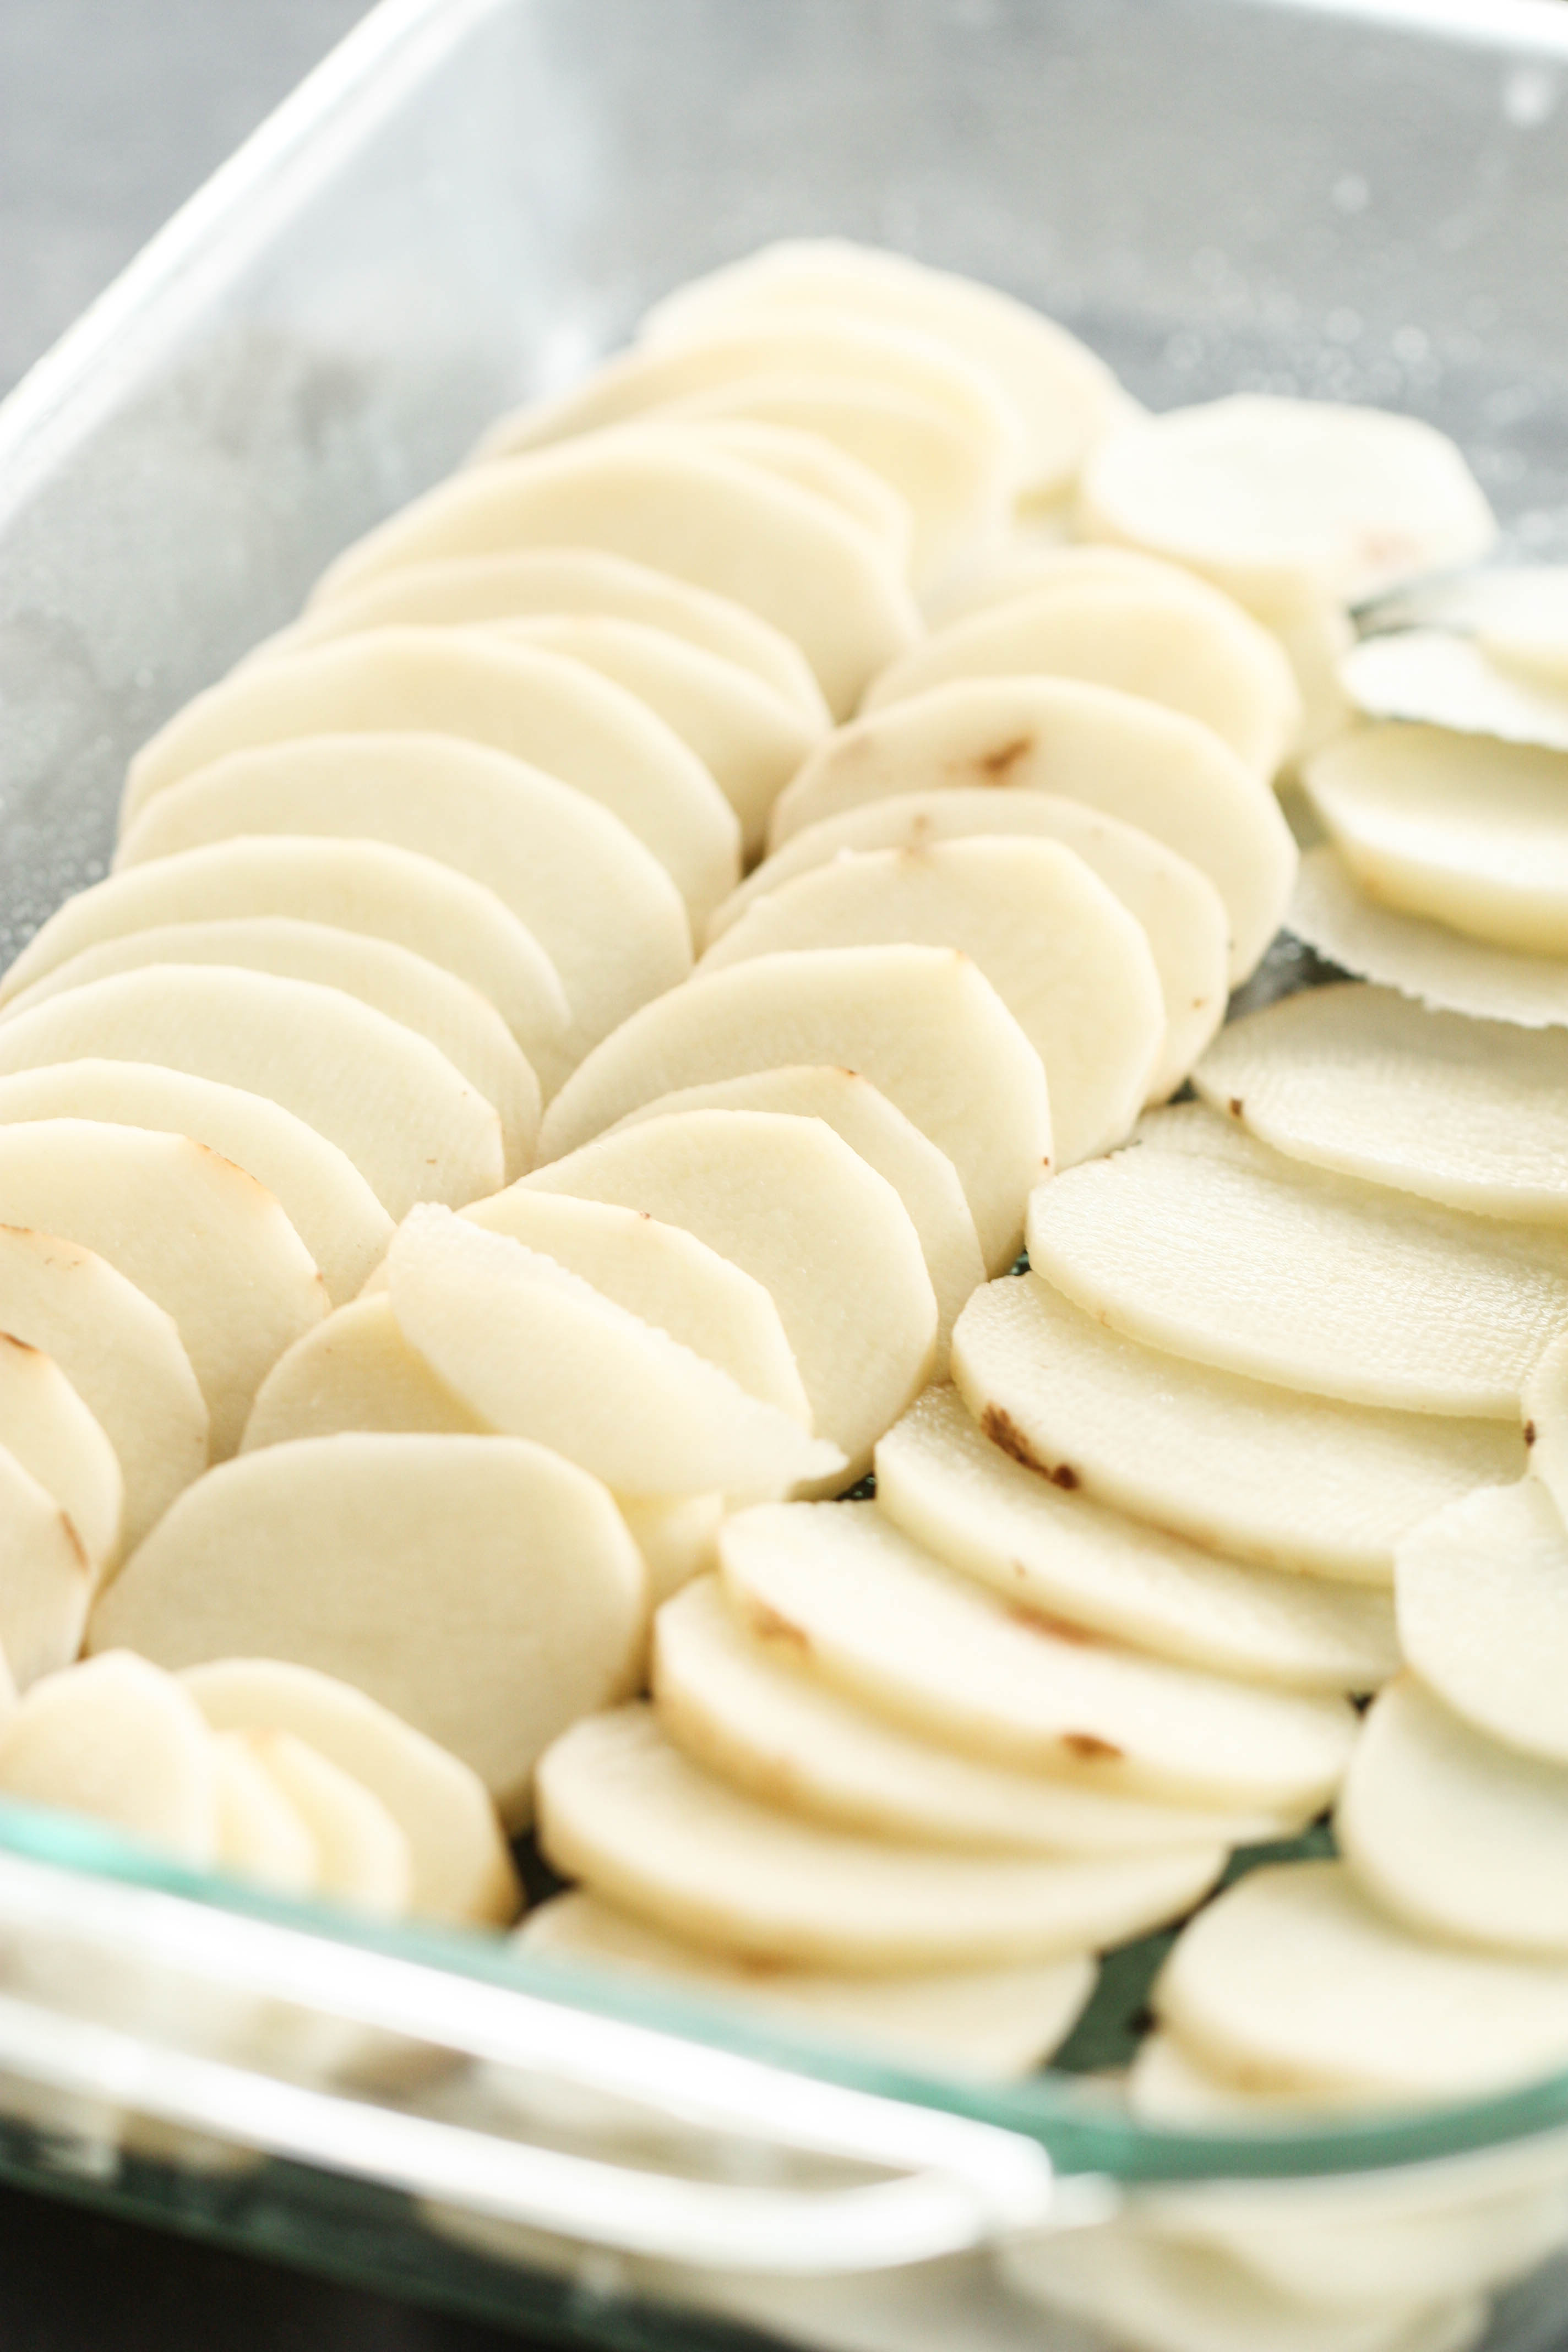 russet potatoes peeled and thinly sliced in a baking pan